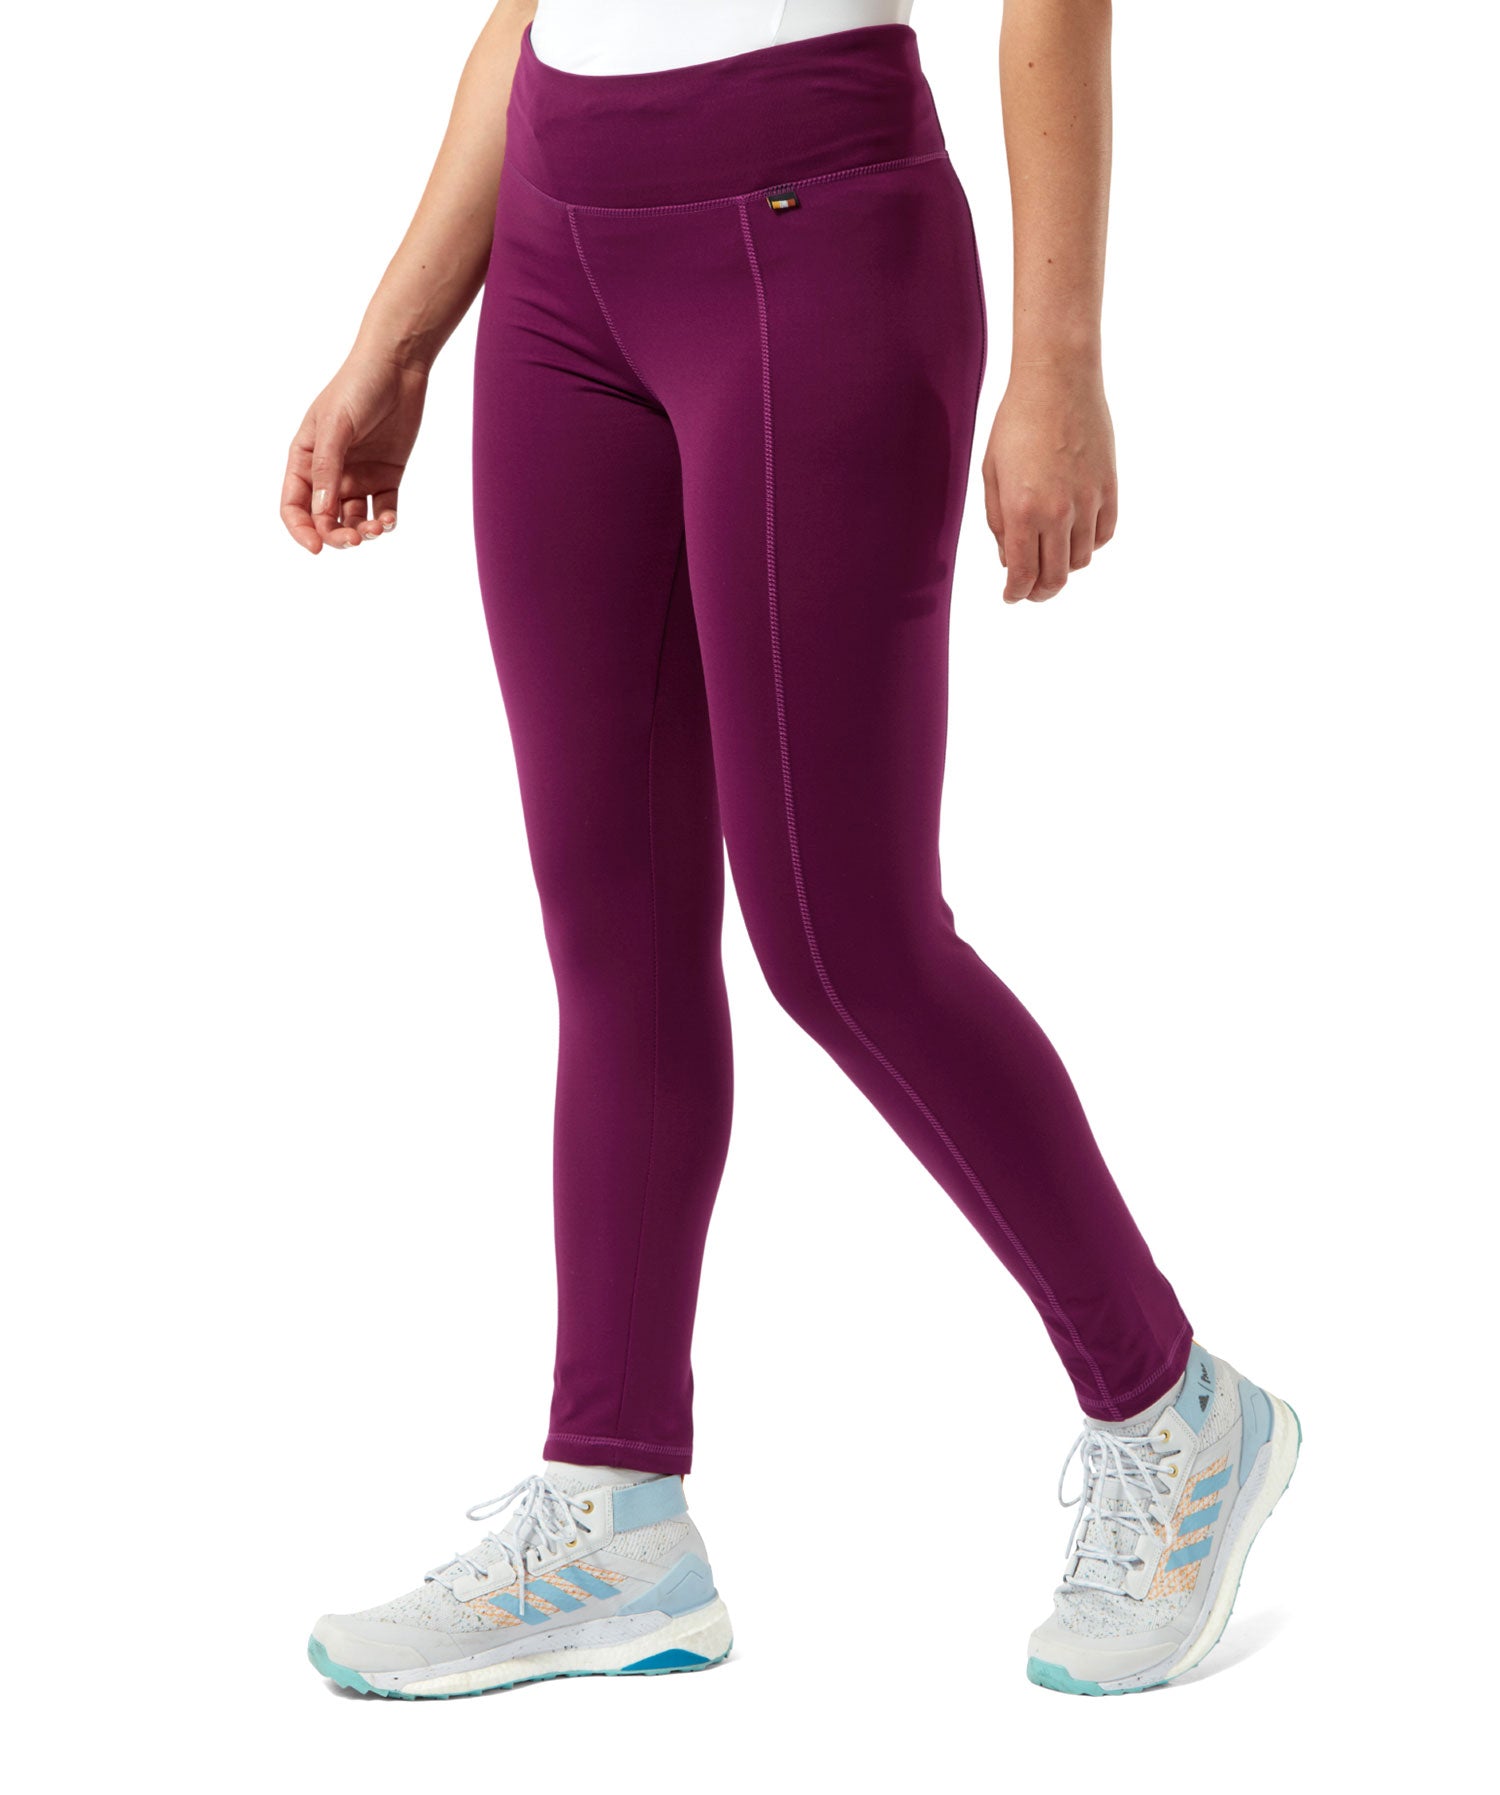 waistband Craghoppers Velocity Tights